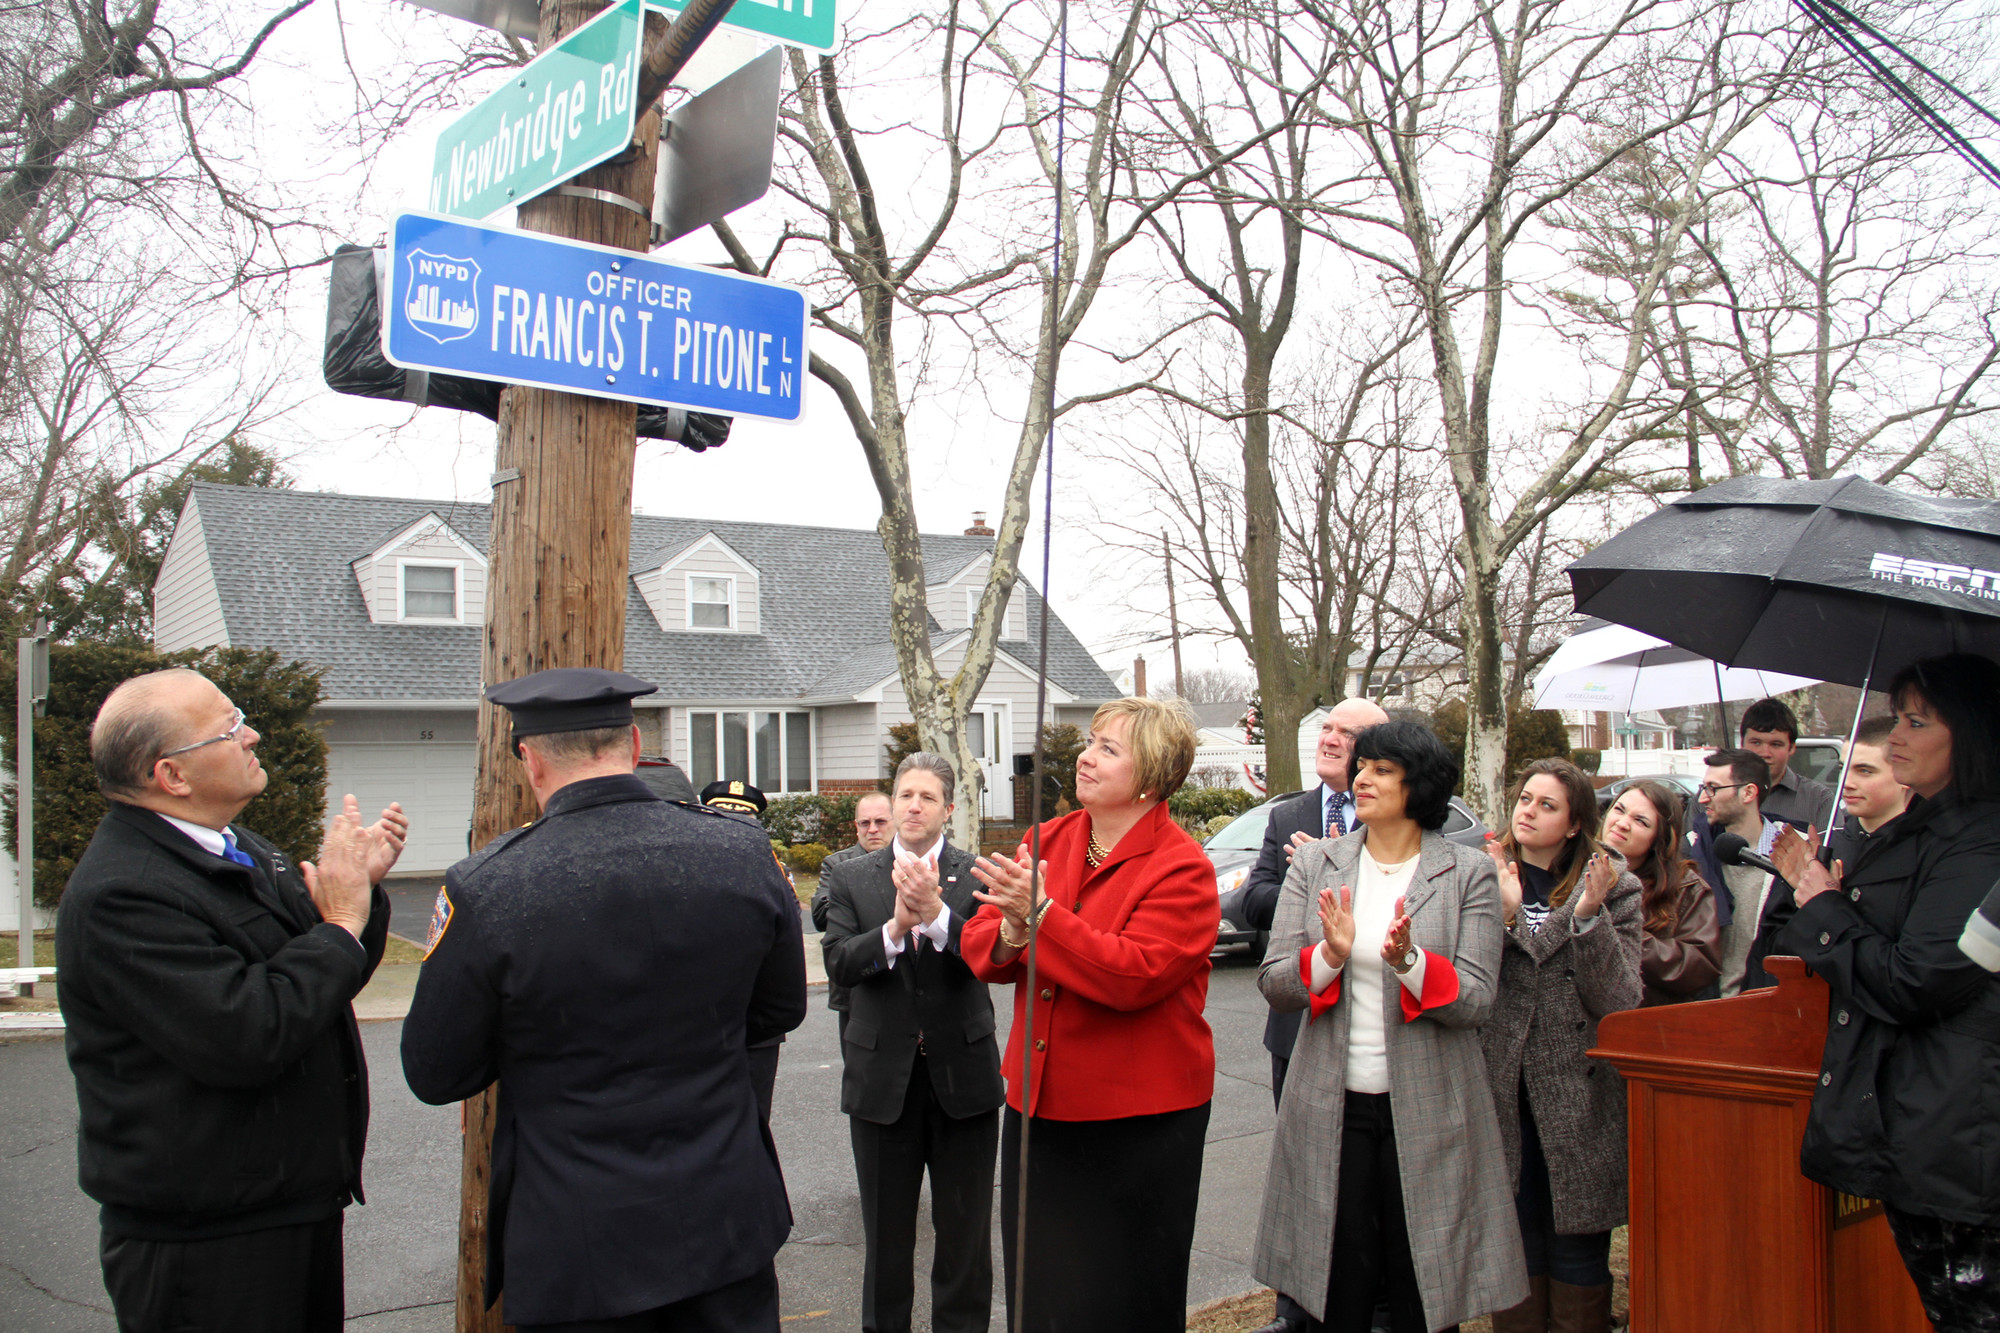 The unveiling of a street sign dedicated to Officer Francis T. Pitone, an NYPD officer and September 11 first responder who died last August, was met with applause.